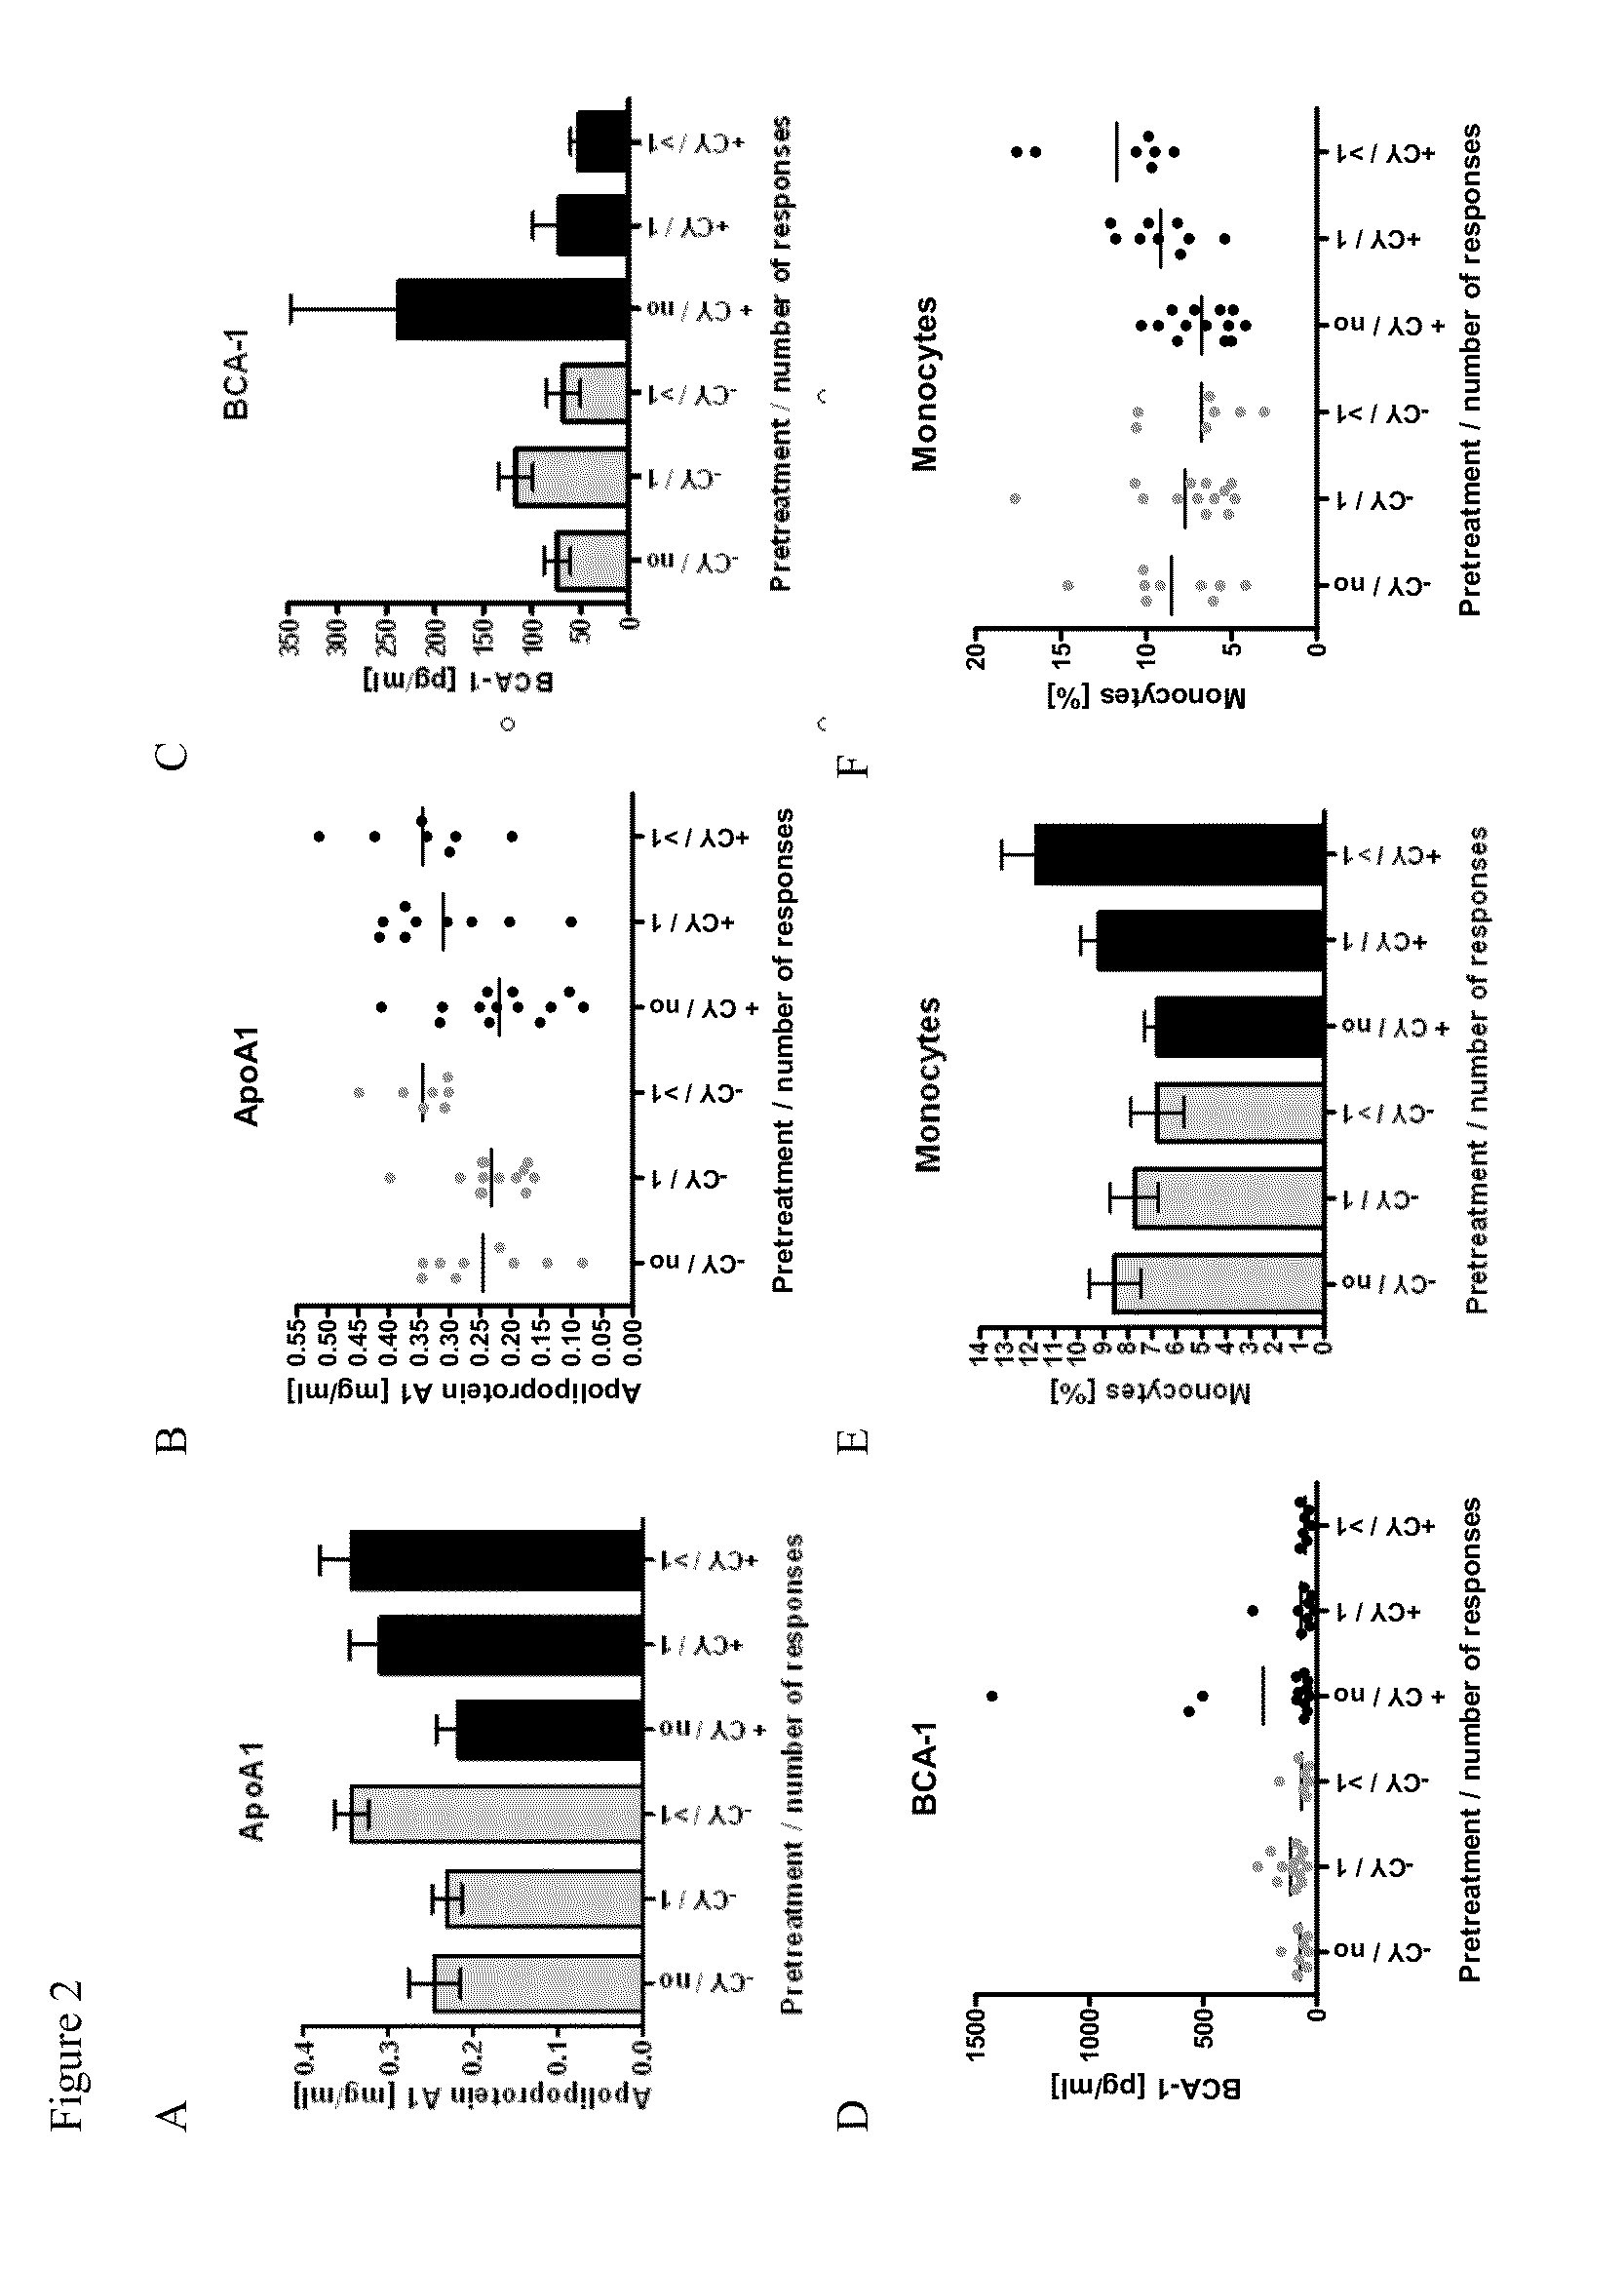 Methods of using biomarkers for predicting the outcome of an immunotherapy against cancer